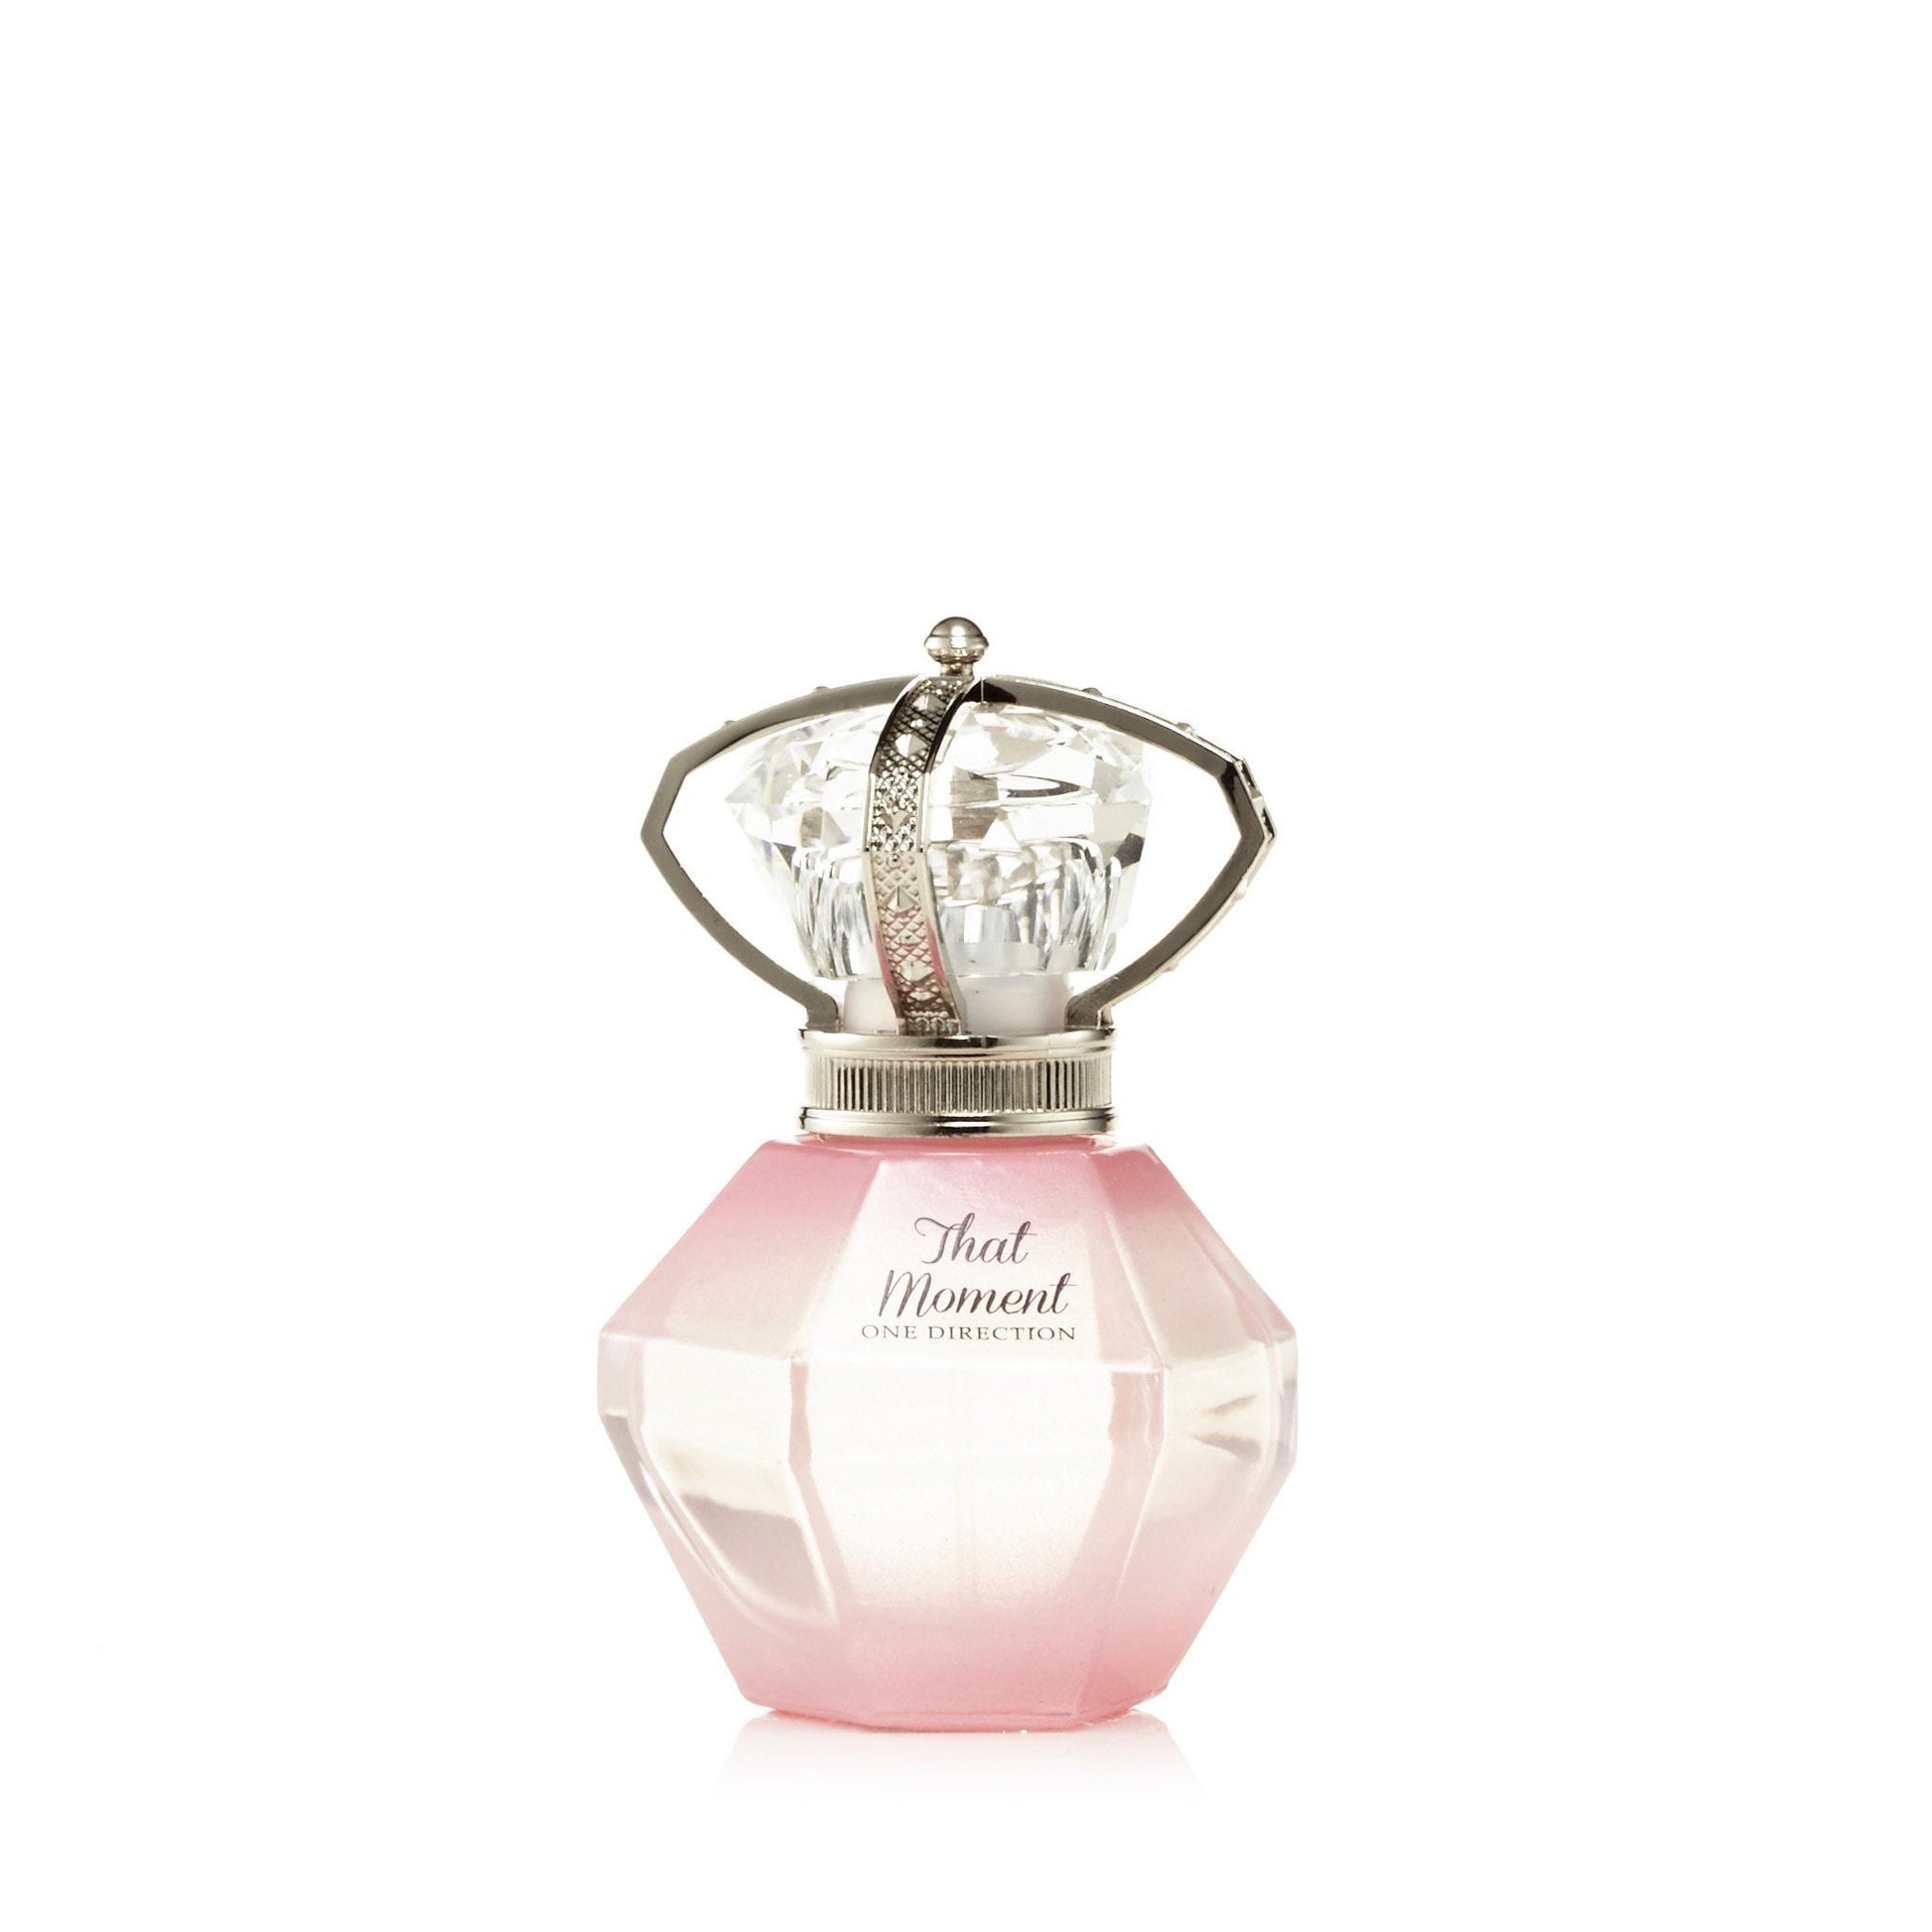 That Moment Eau de Parfum Spray for Women by One Direction, Product image 2